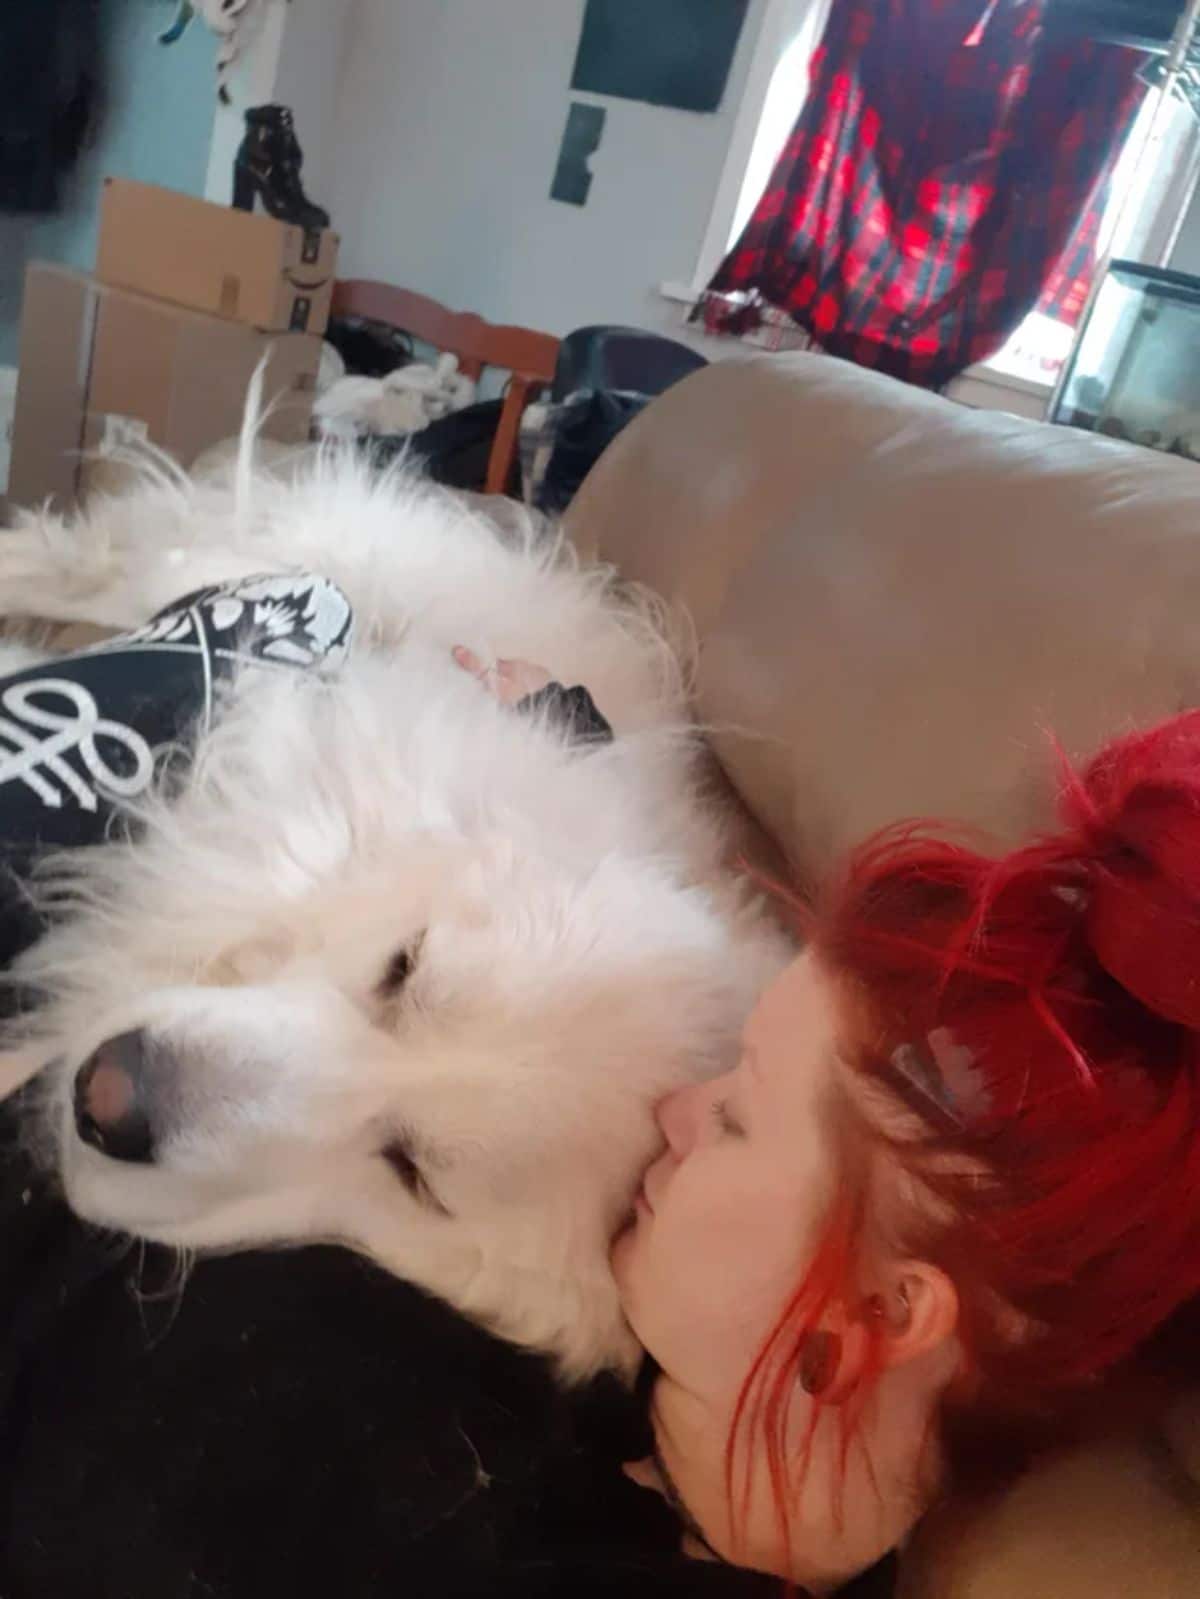 large fluffy white dog laying on a woman laying on a brown sofa